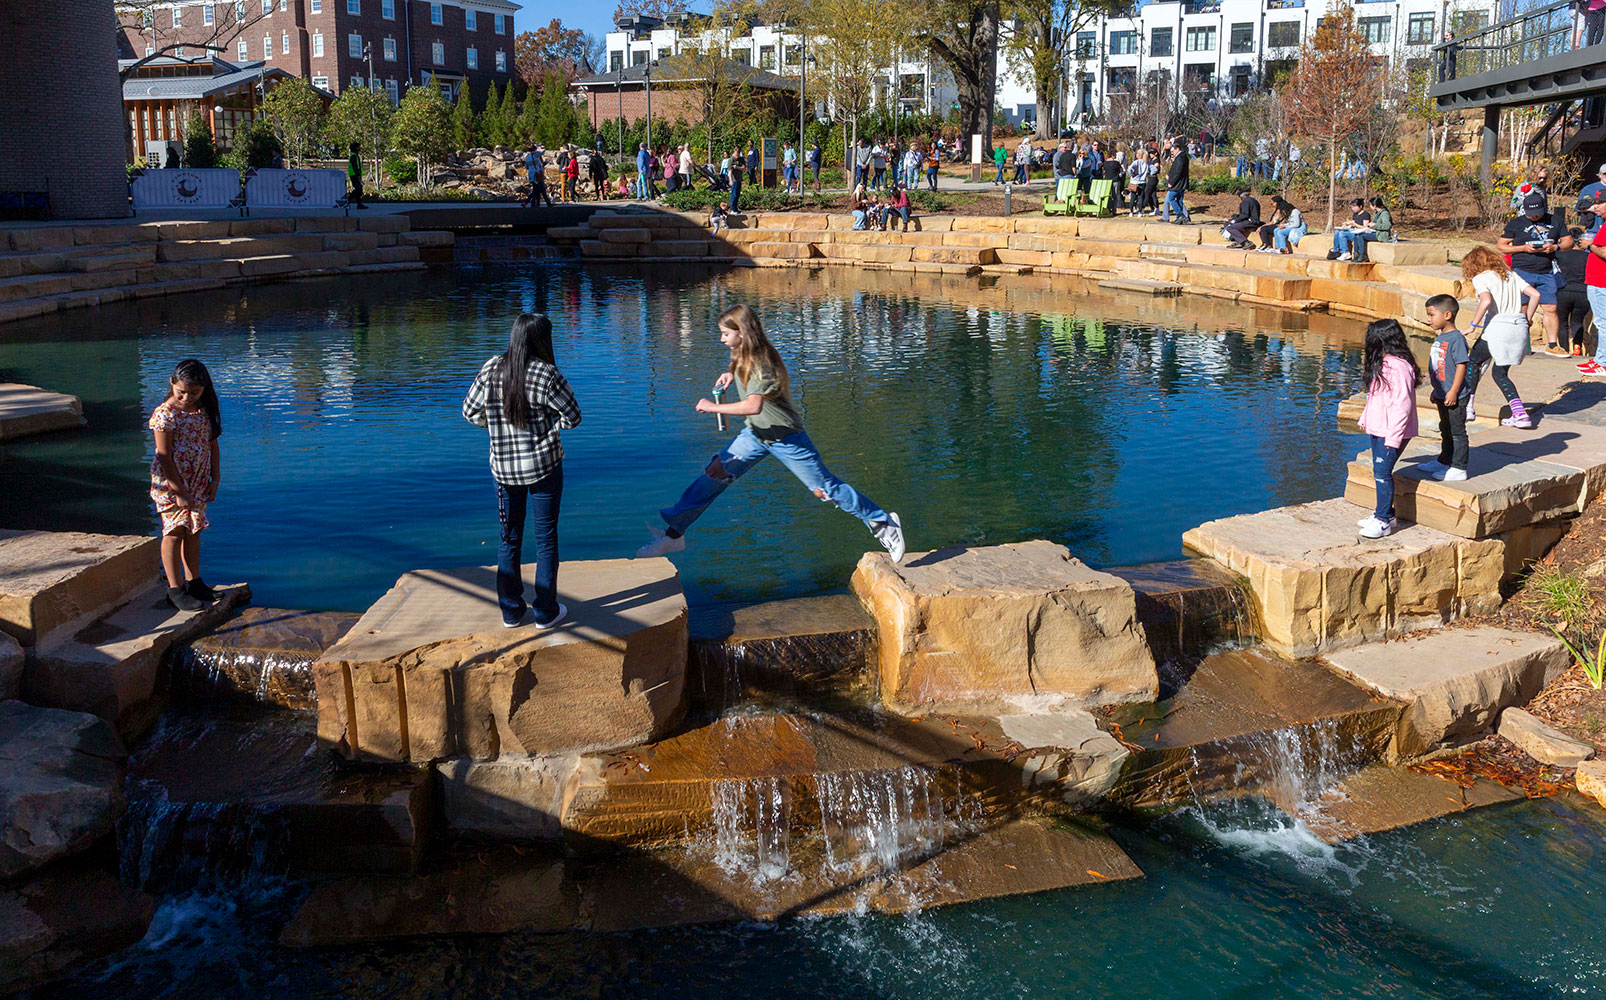 The park's tiered water feature — designed to improve water quality and mitigate flooding downstream — is the perfect place to explore (and jump rocks).